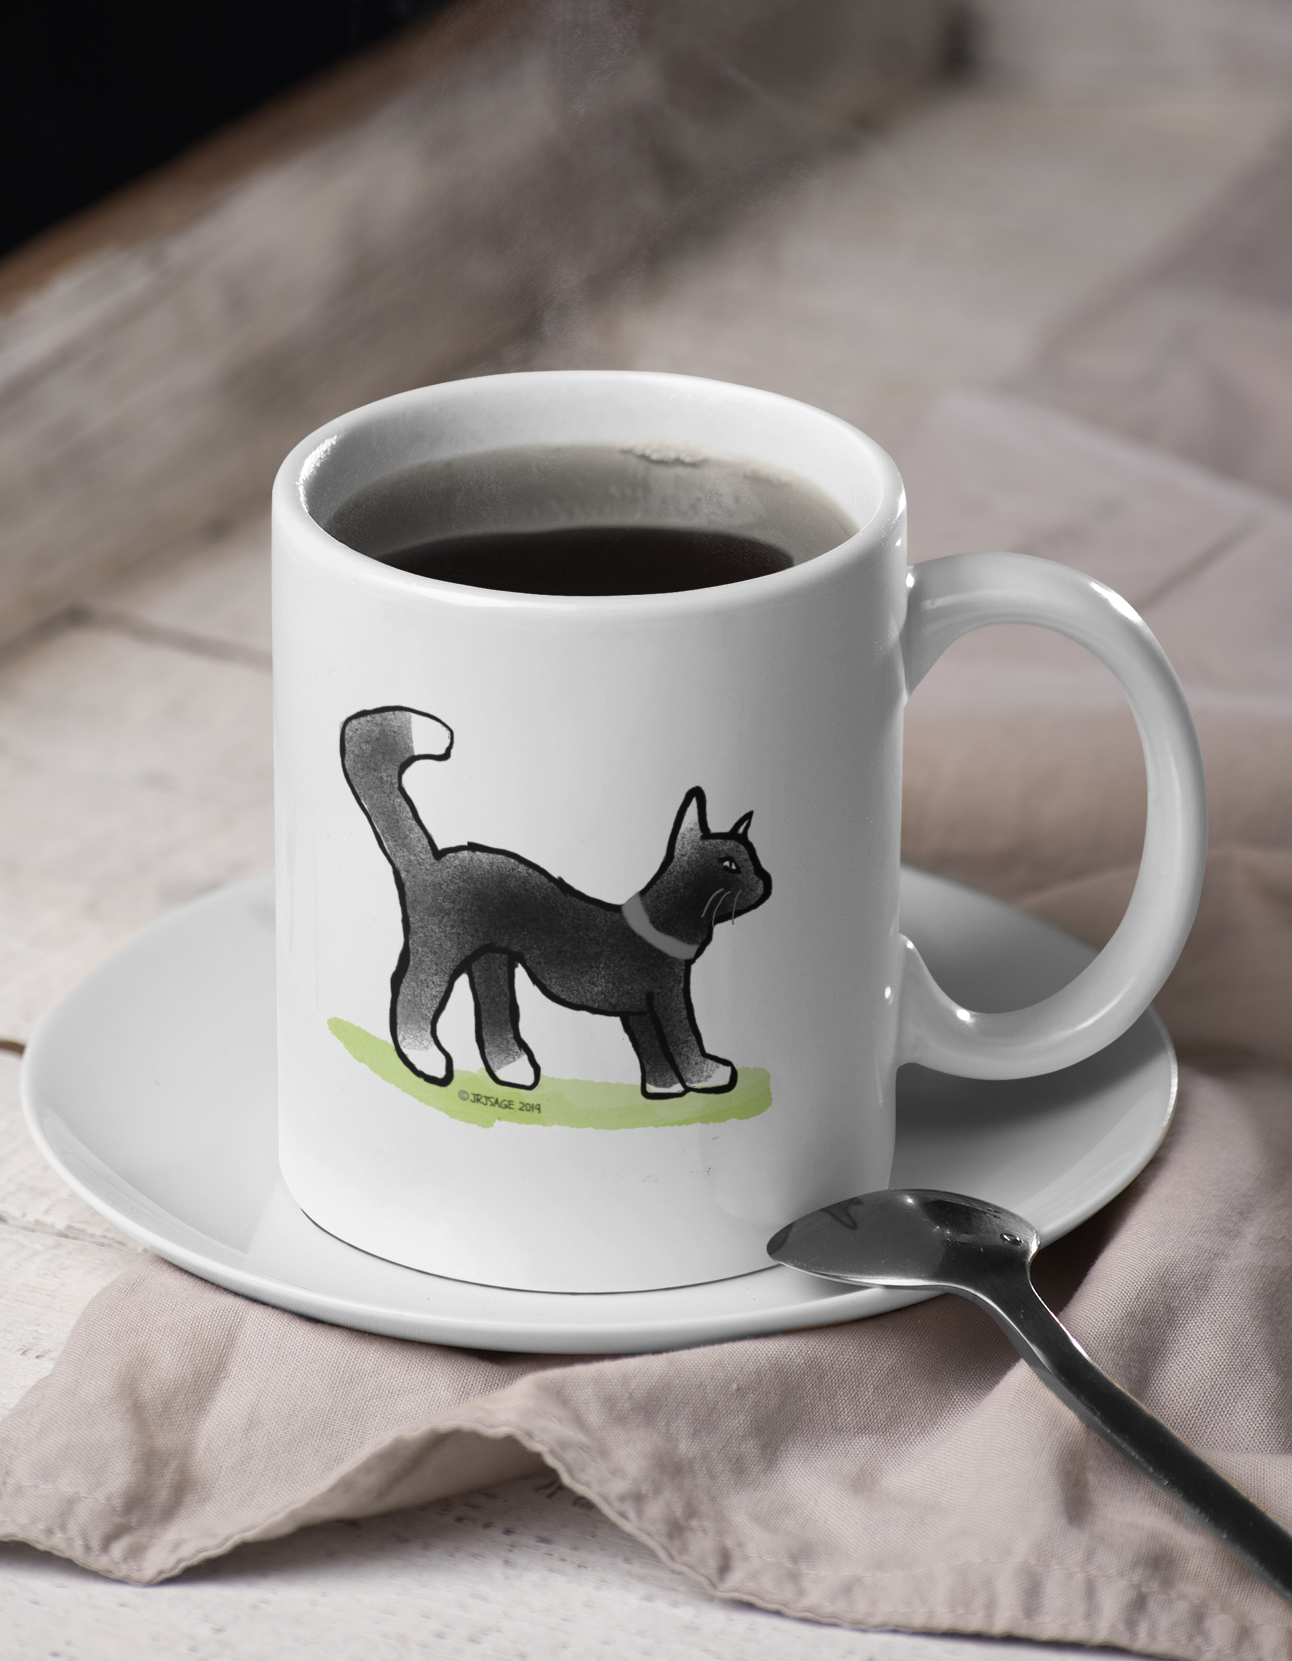 Black Cat Mug - A White Ceramic Hector and Bone coffee Mug on a saucer with a cute Black Cat with white bits kitty illustration